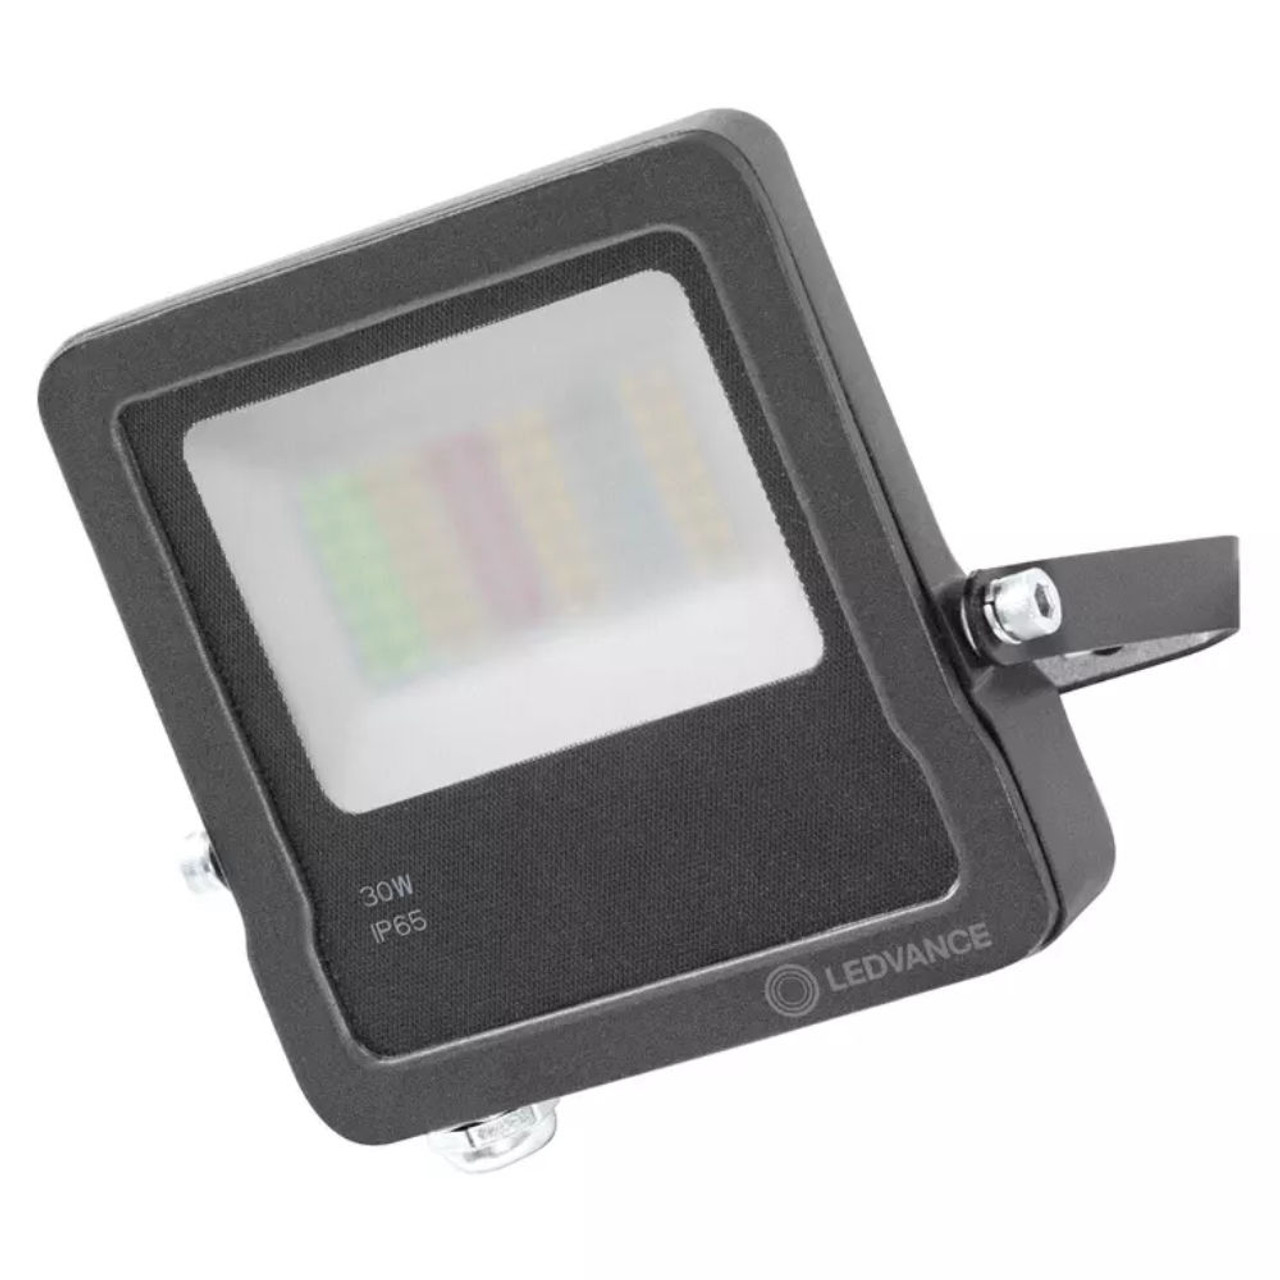 LED Smart Floodlight Multicolor RGB with WIFI 3000K 30W 100 Degrees